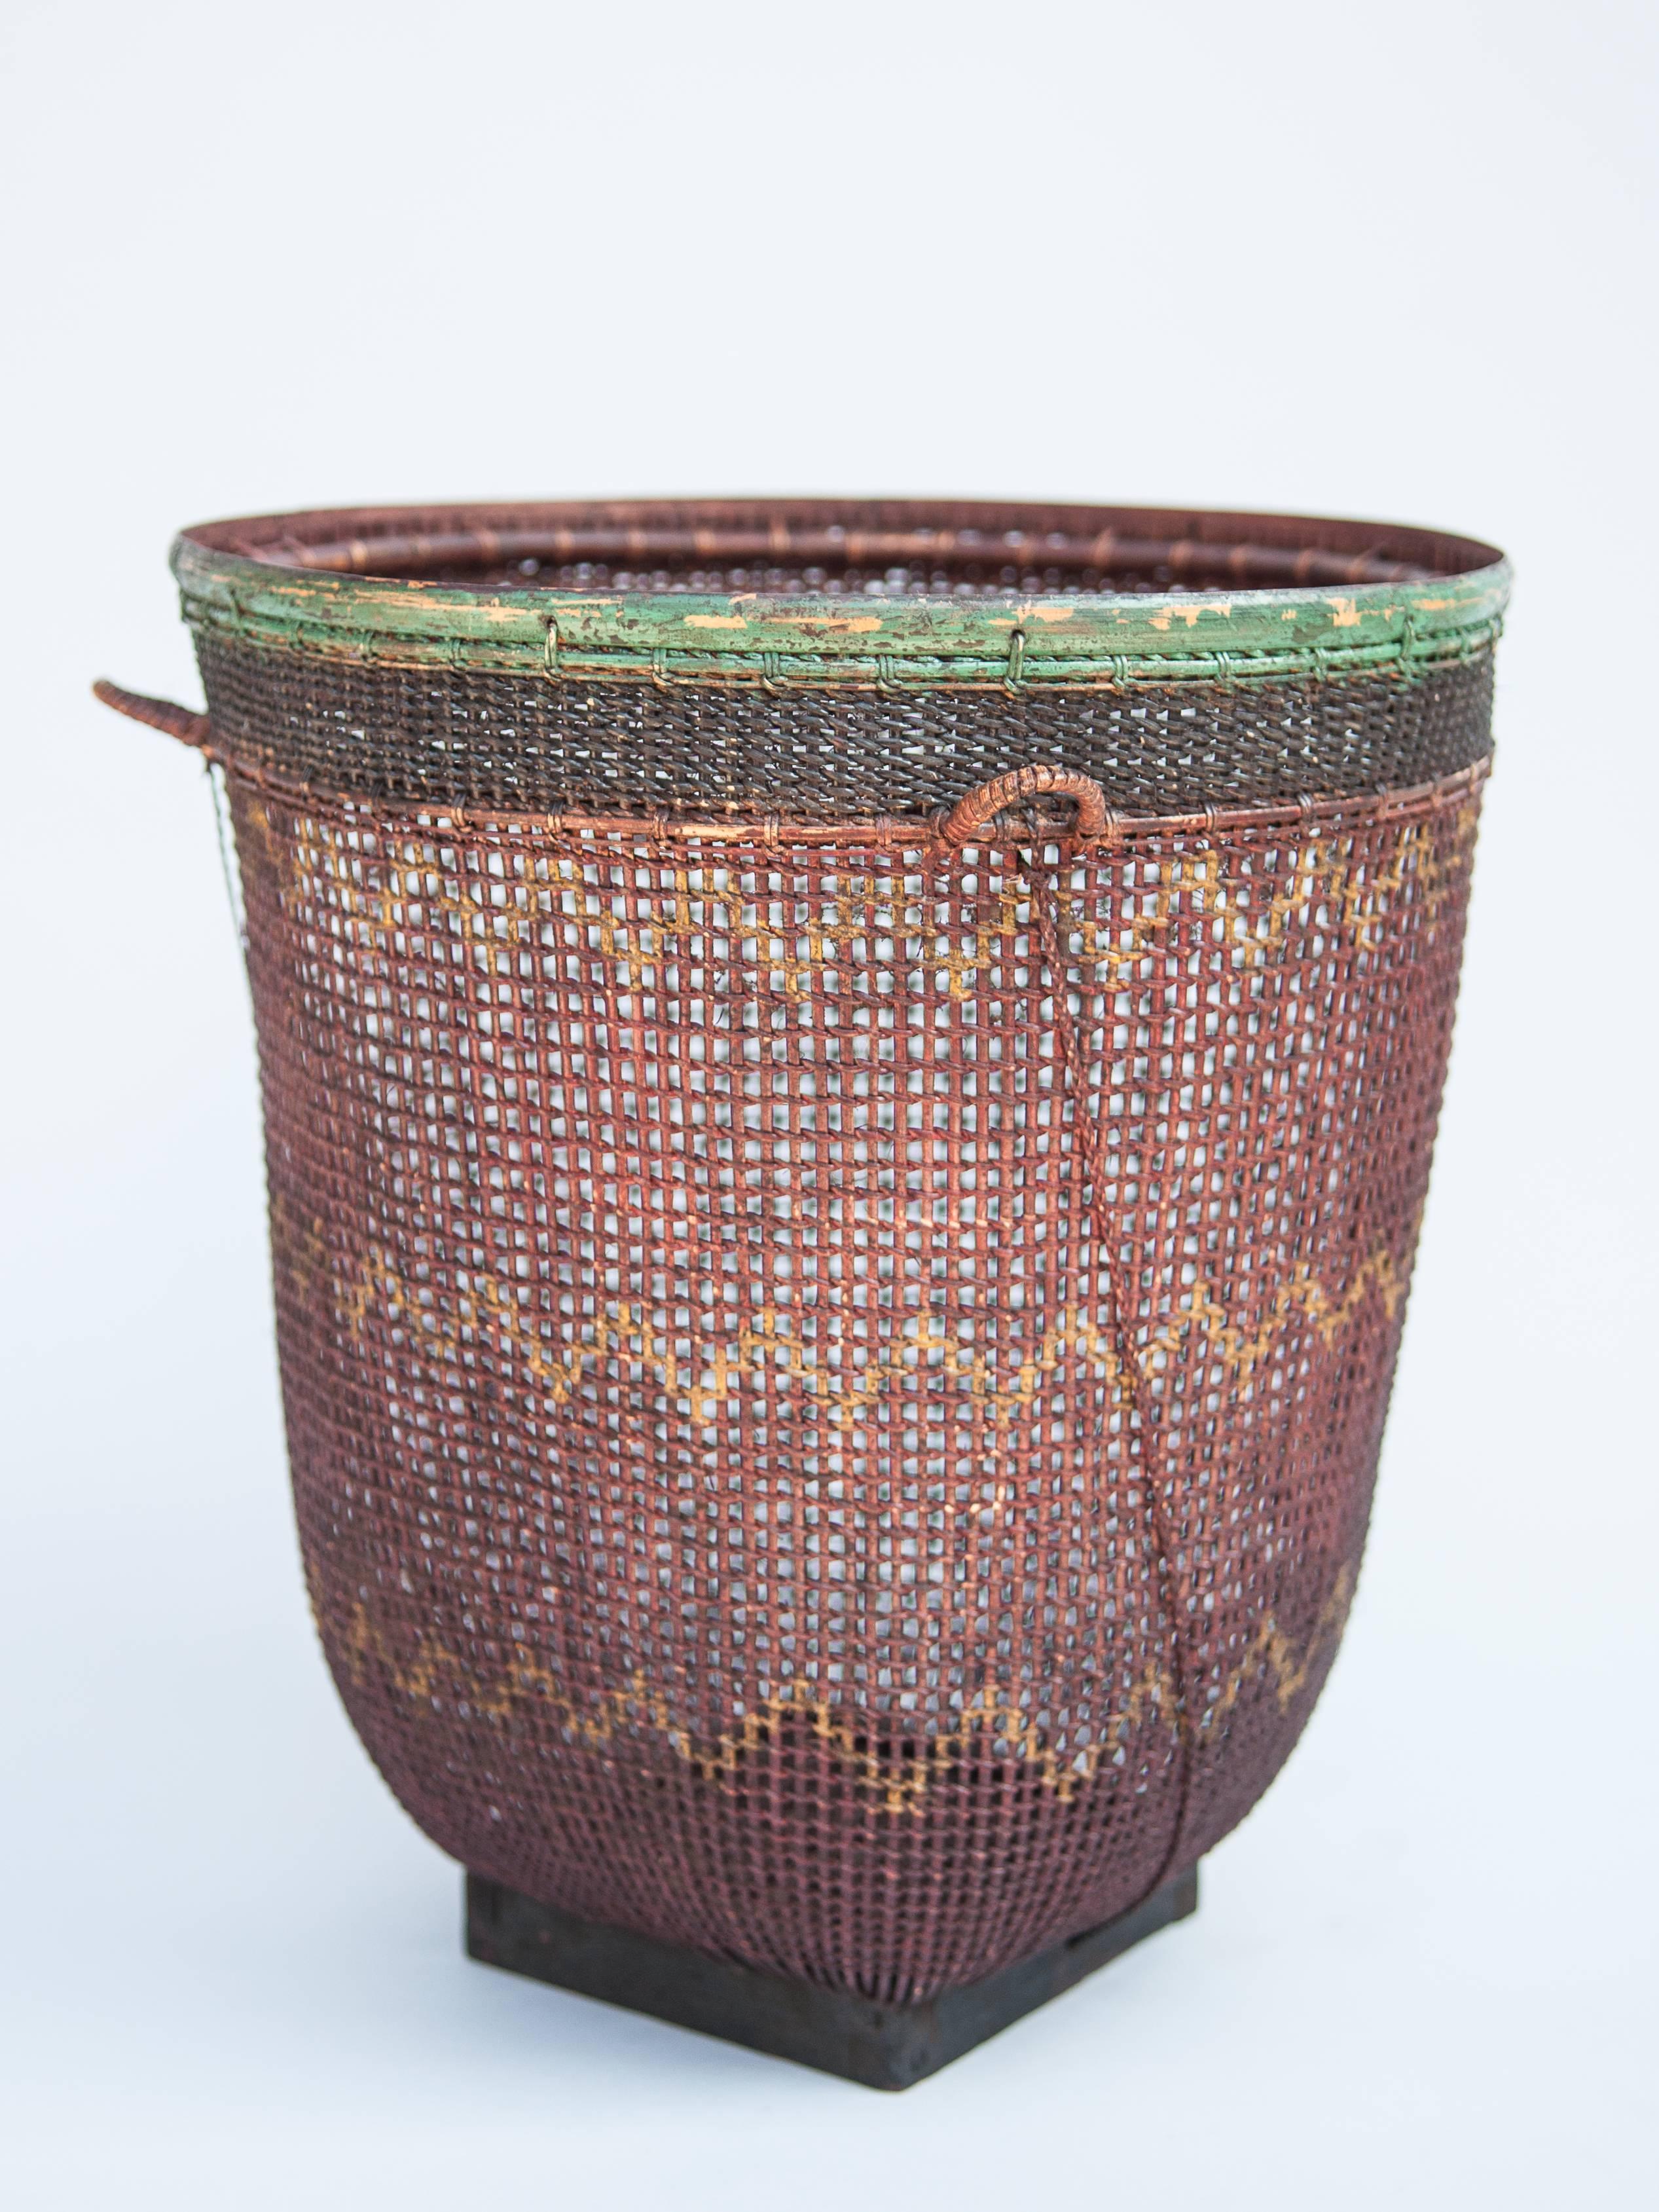 Tribal storage and carrying basket Palembang Sumatra, mid-late 20th century.
Bamboo basket from the Palembang area of south Sumatra; finely woven of strips of bamboo and with painted designs and original color. It incorporates a narrow wooden base